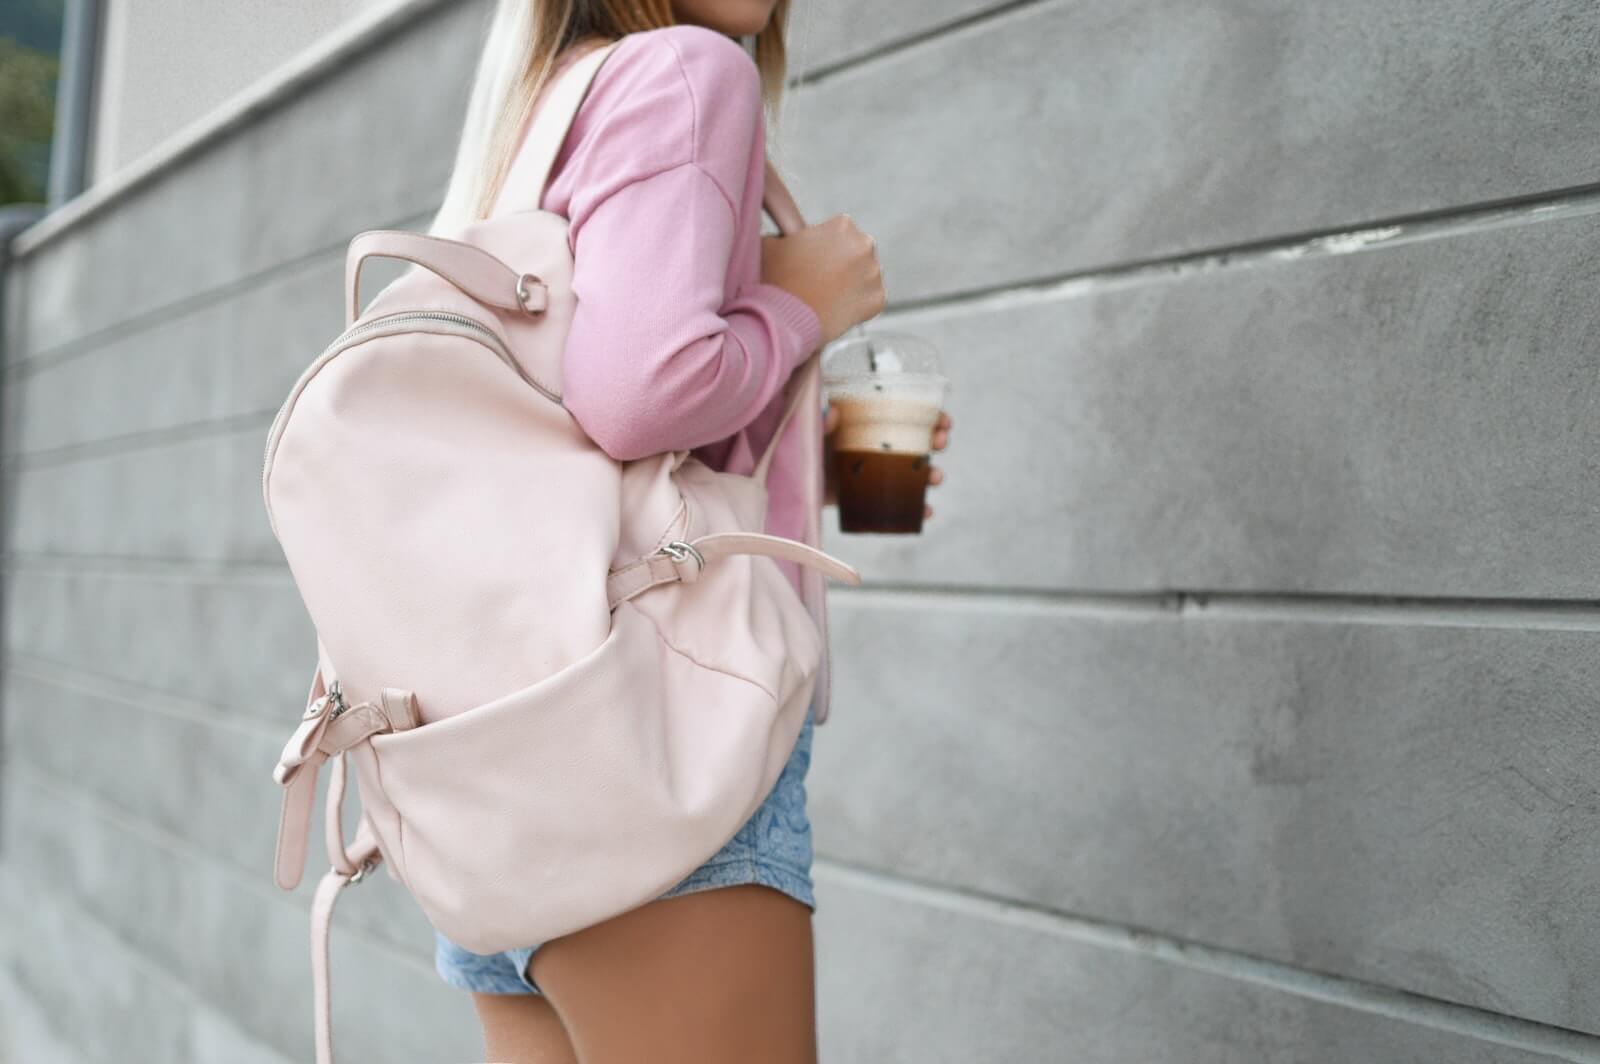 Best Backpacks For Women: Top 5 Bags Most Recommended By Experts - Study Finds